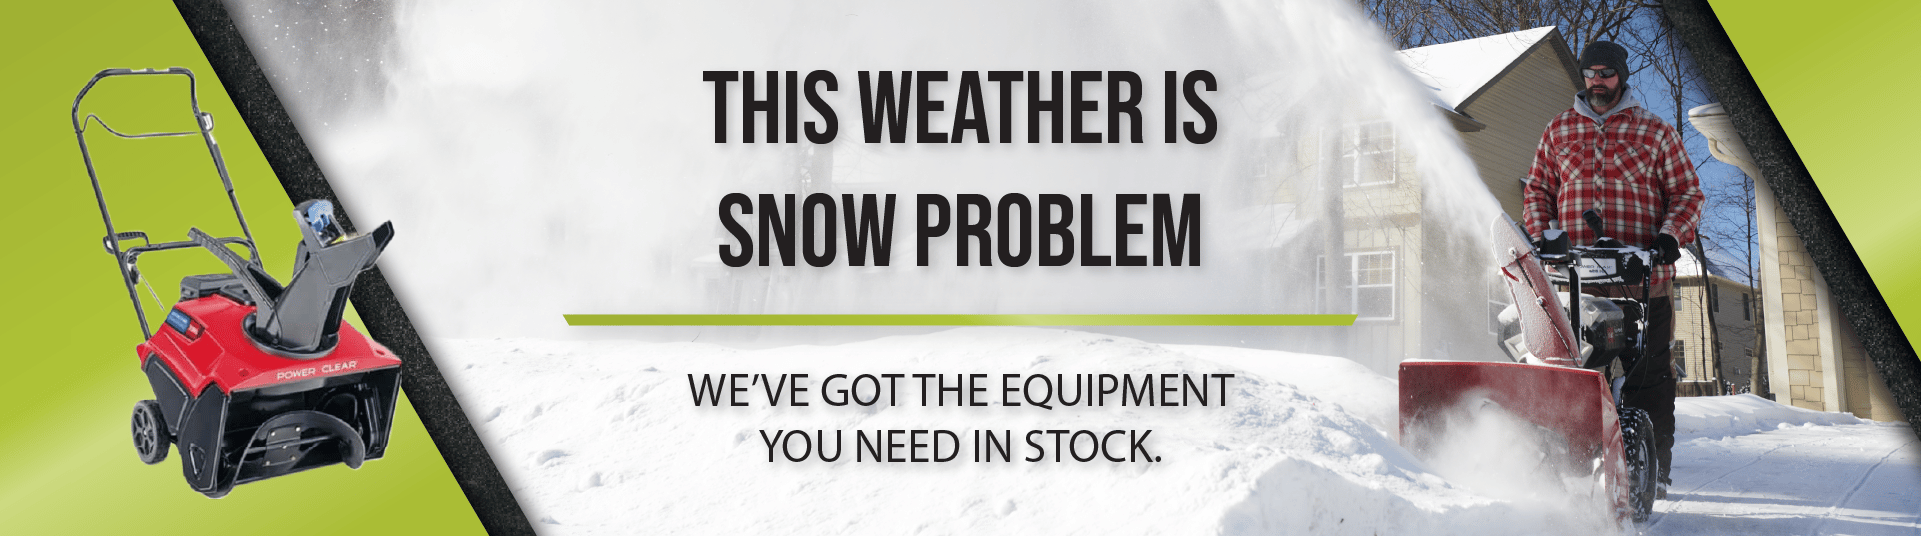 This weather is snow problem. We've got the equipment you need in stock.